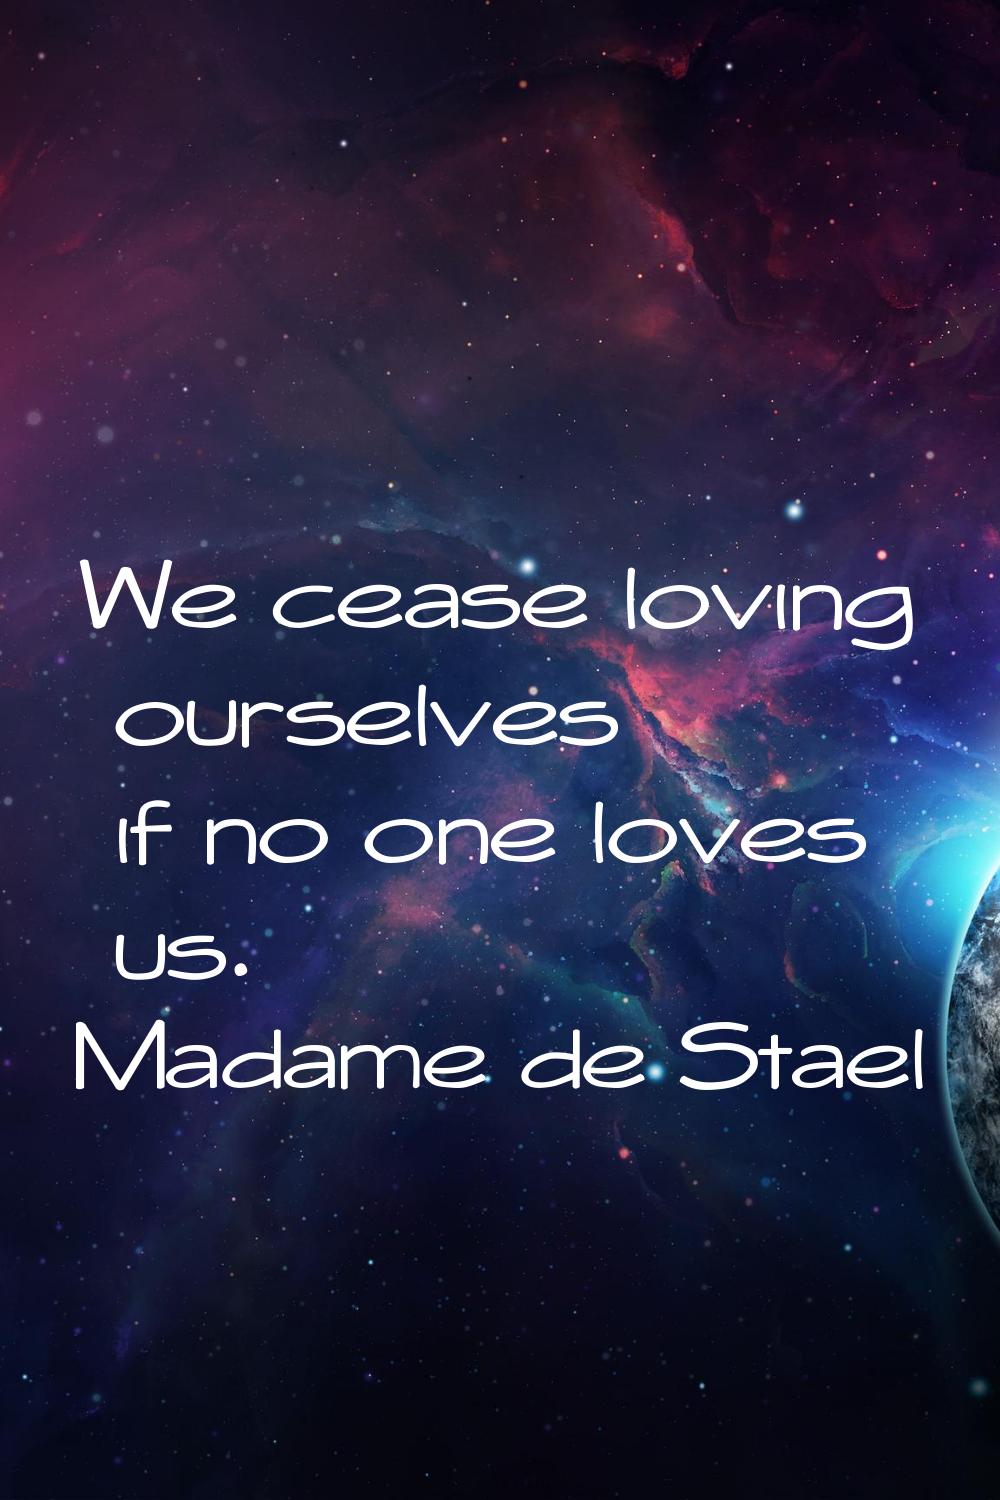 We cease loving ourselves if no one loves us.